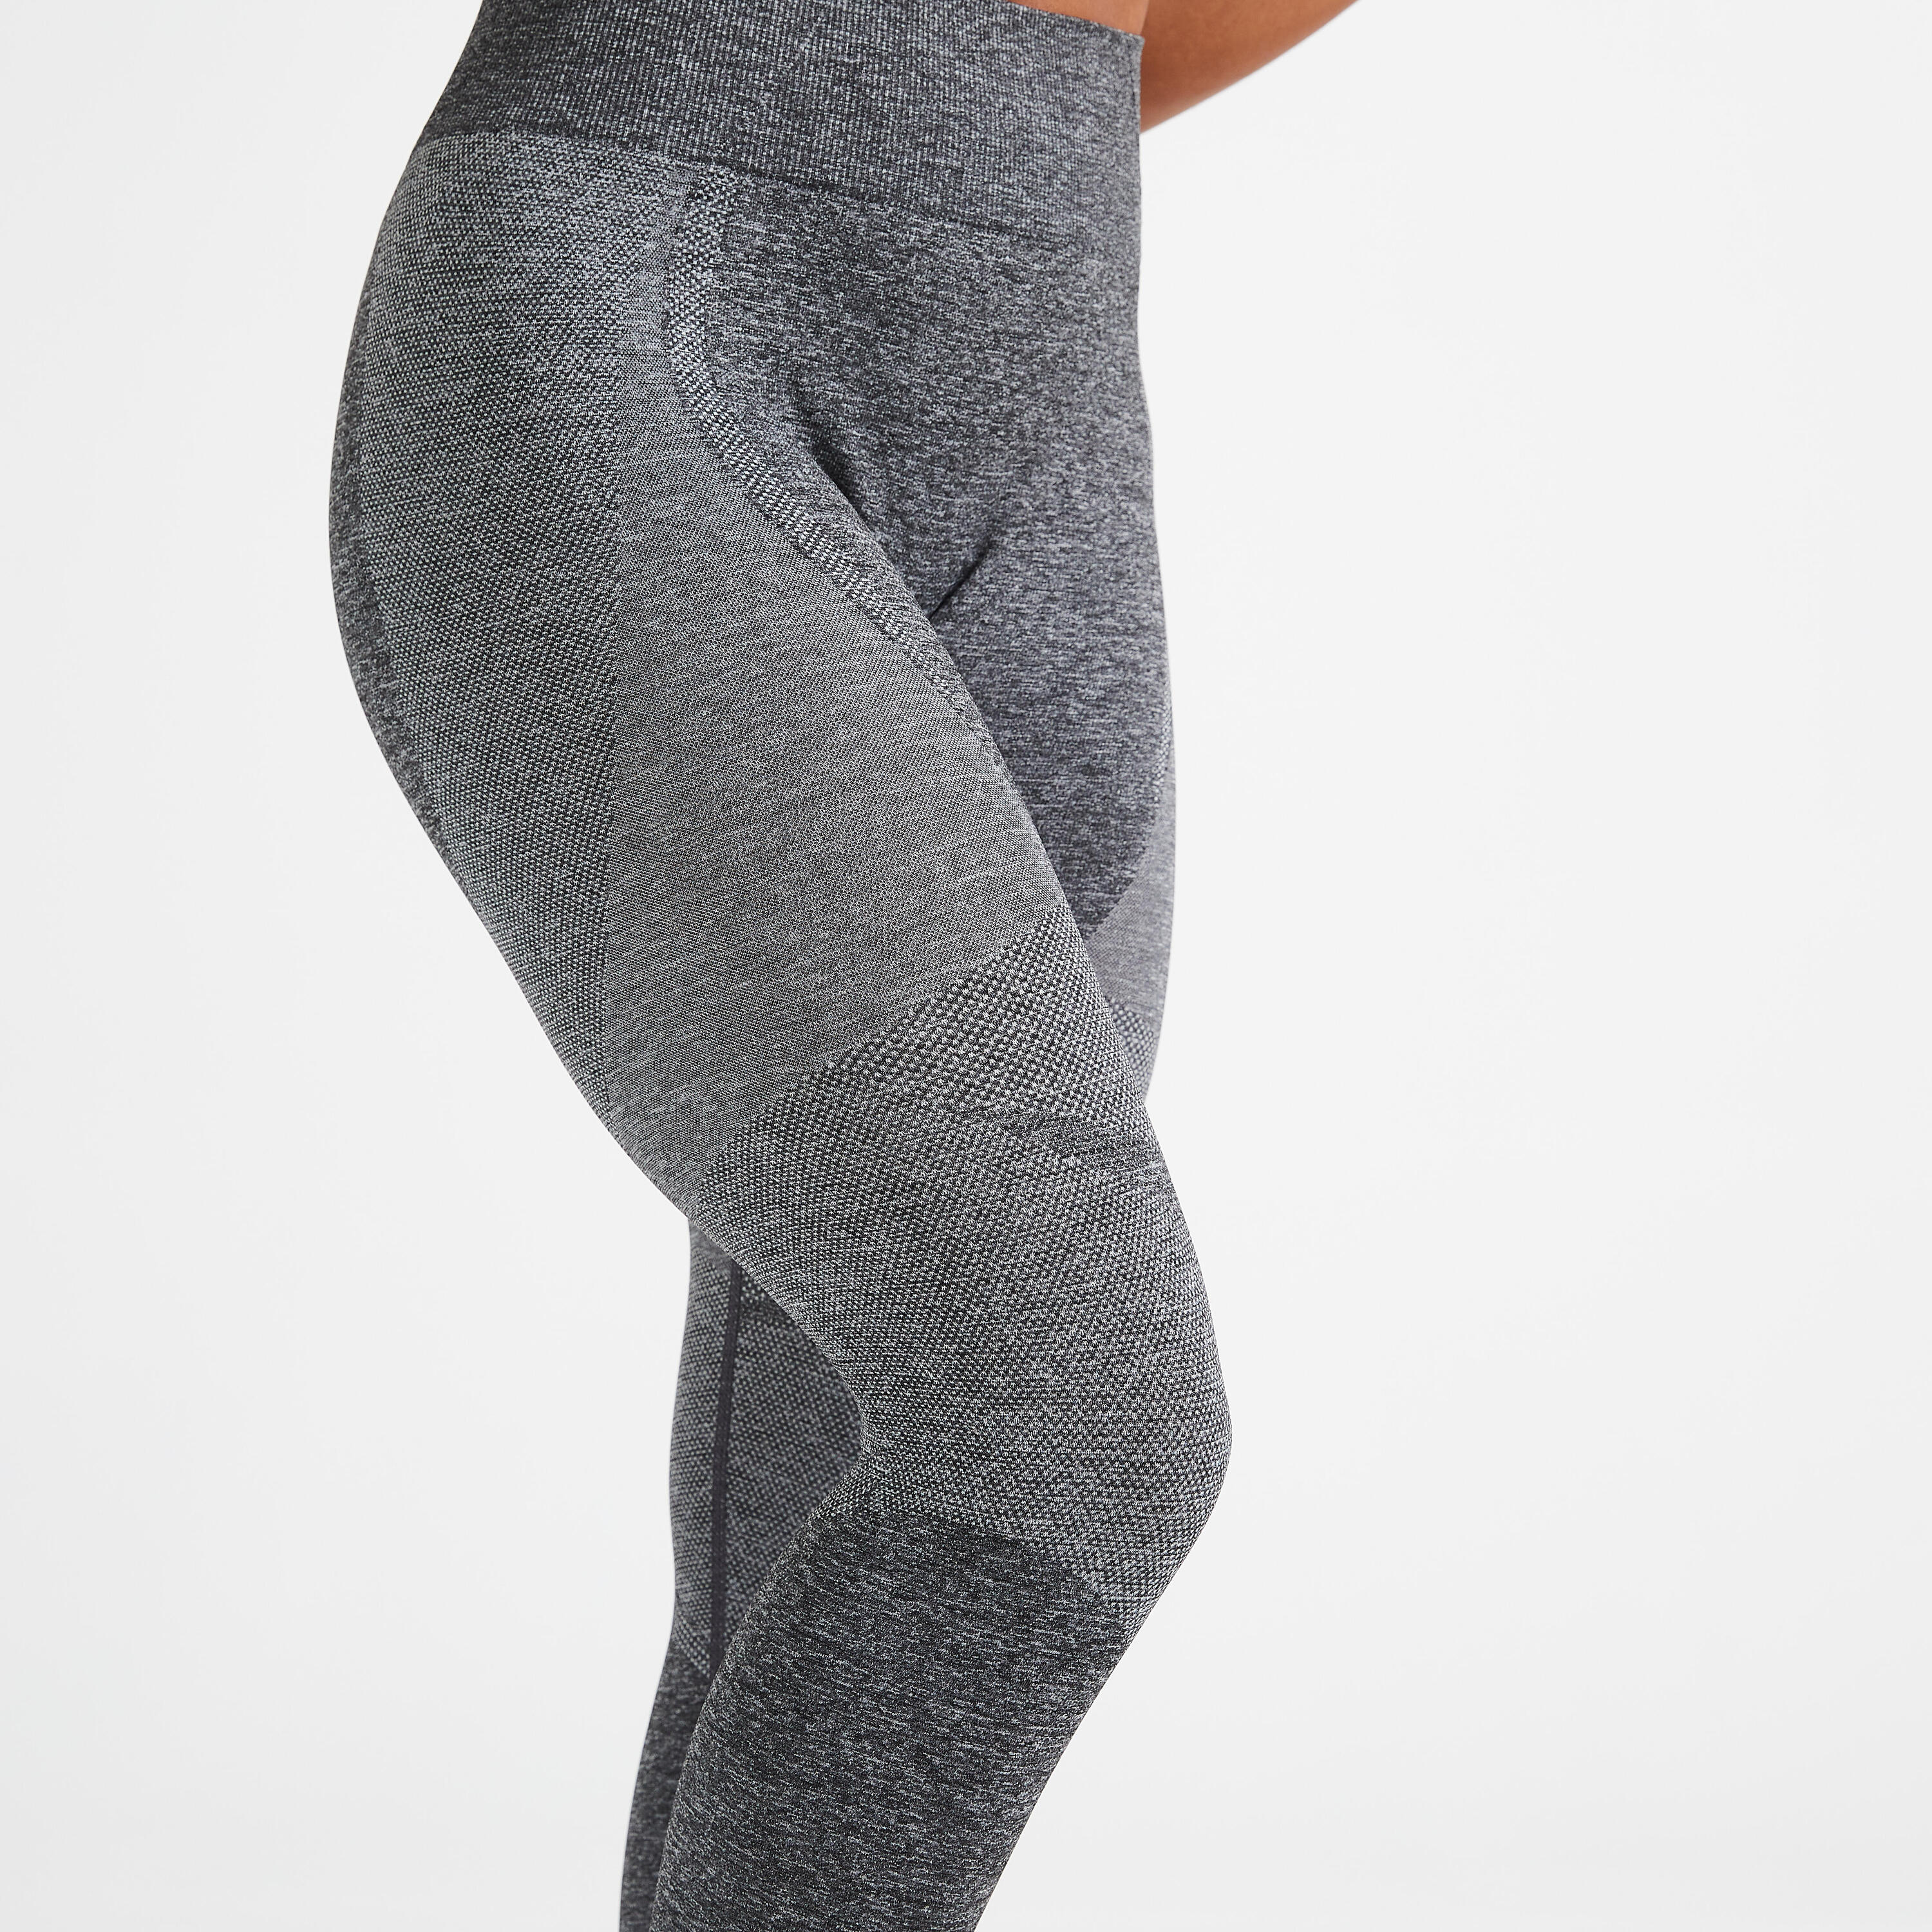 High-Waisted Seamless Fitness Leggings with Phone Pocket - Grey 4/5